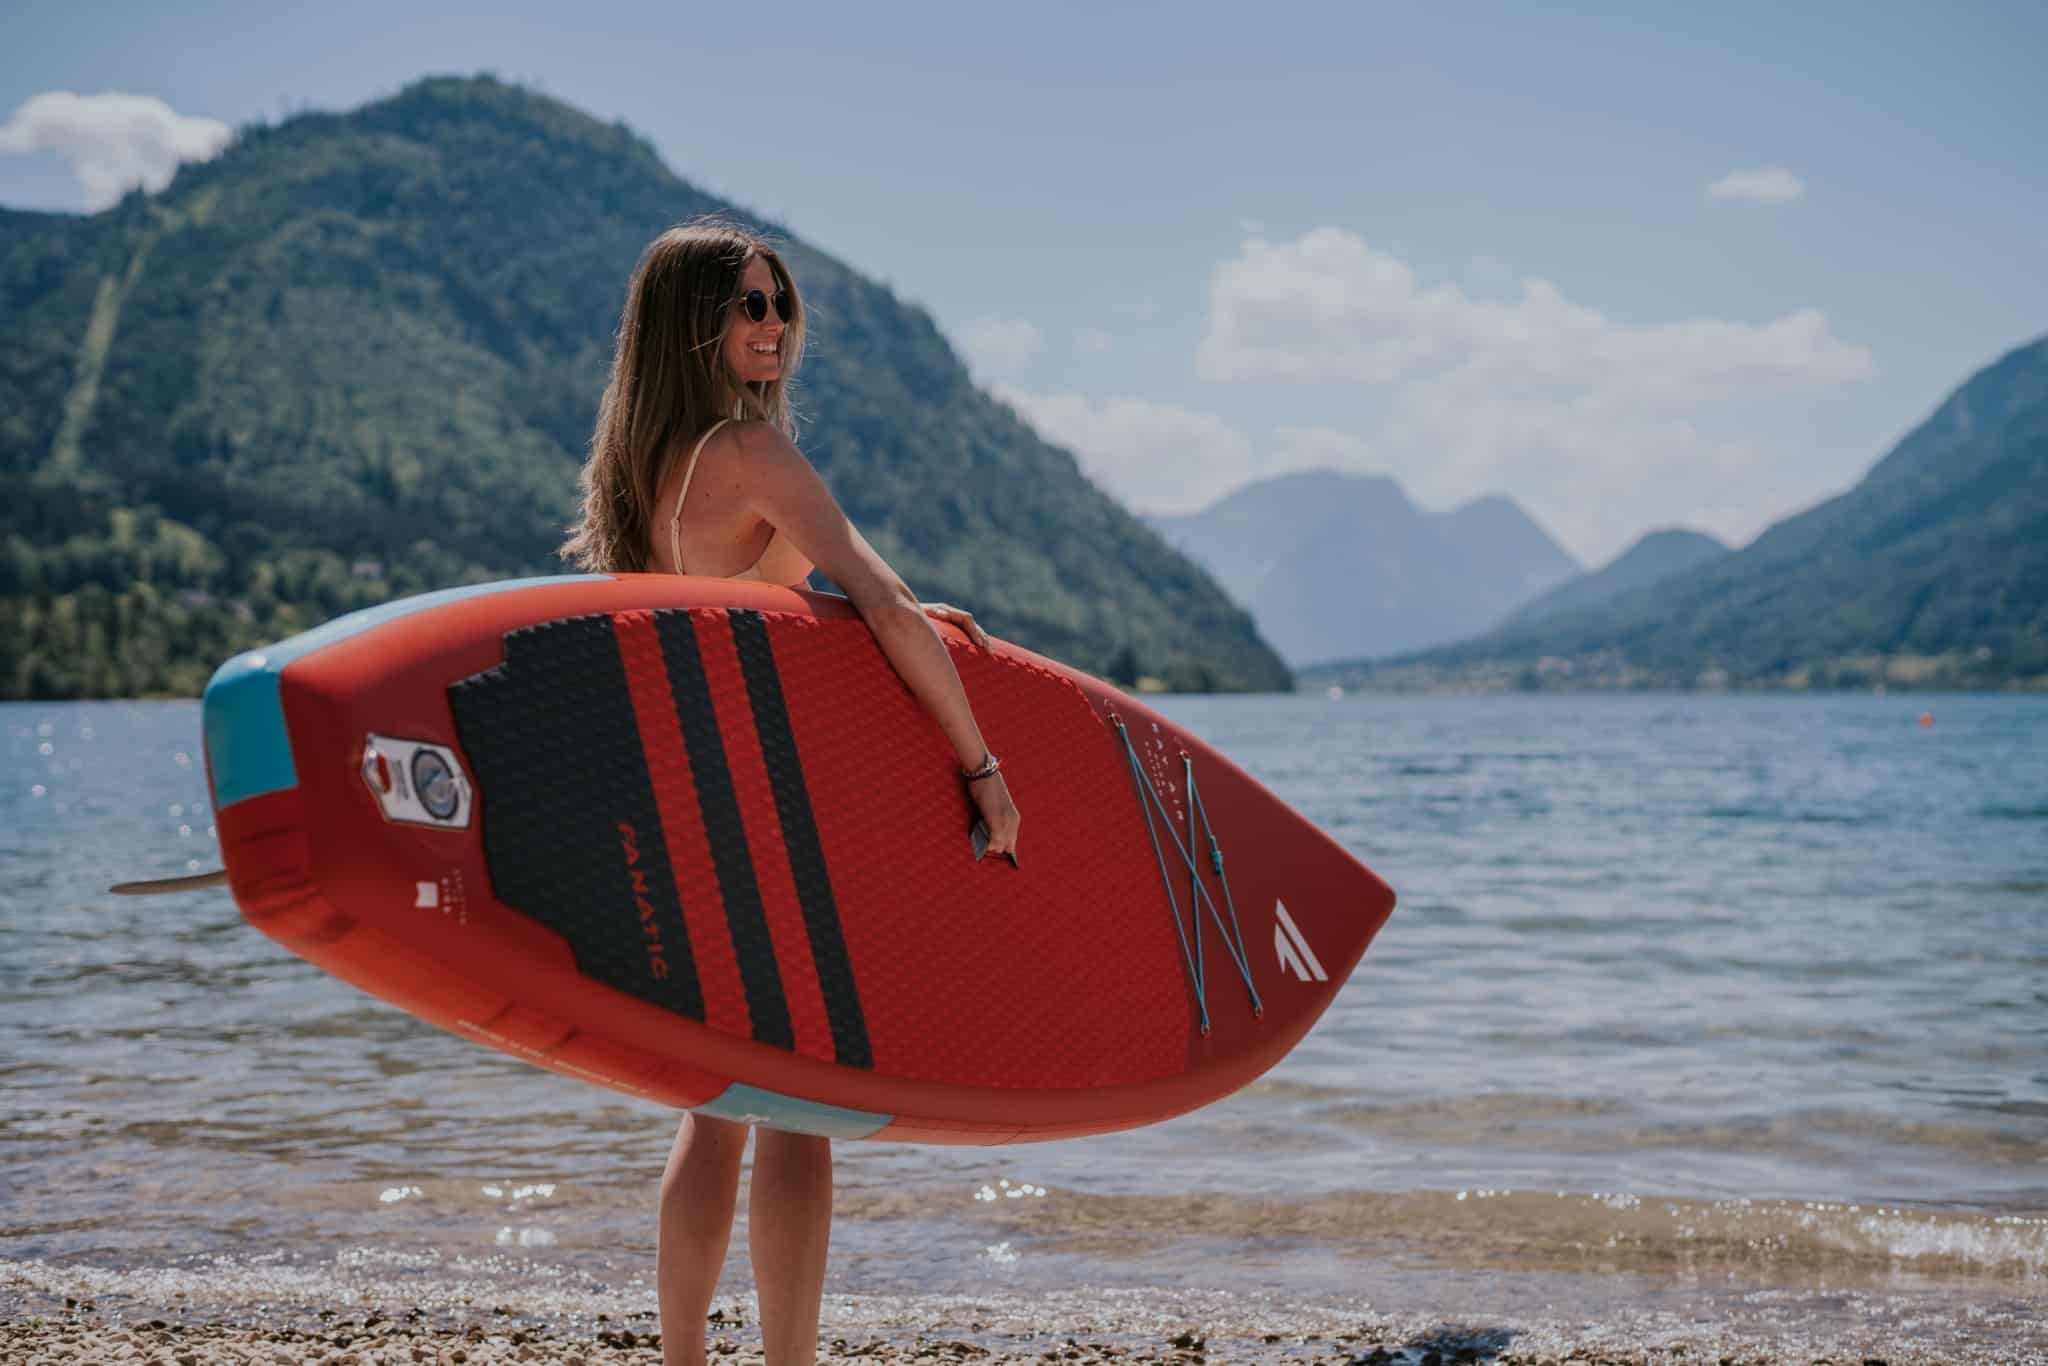 Dame mit Sup Board am See